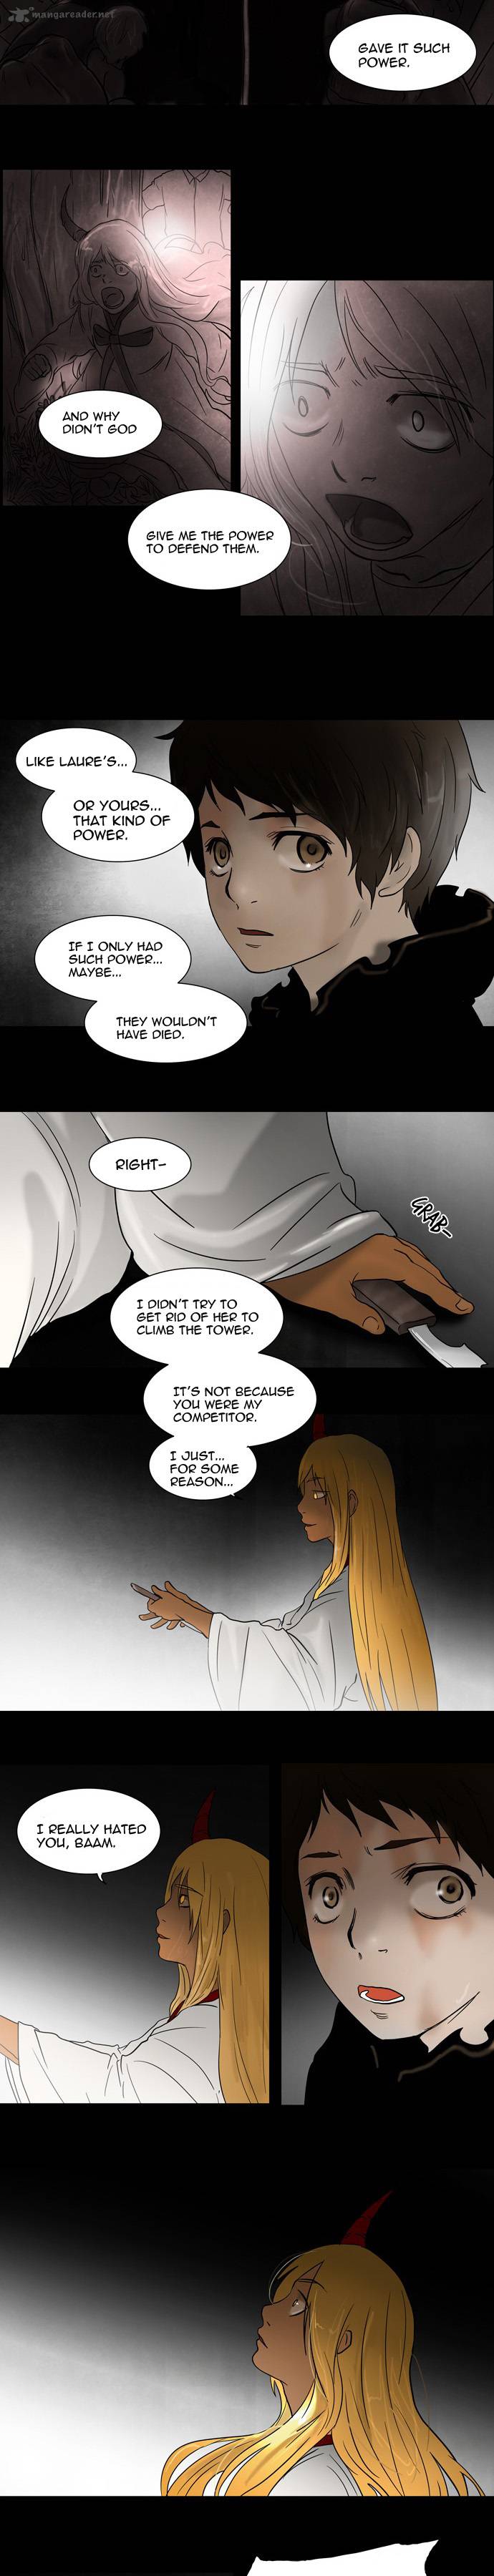 Tower Of God 49 10